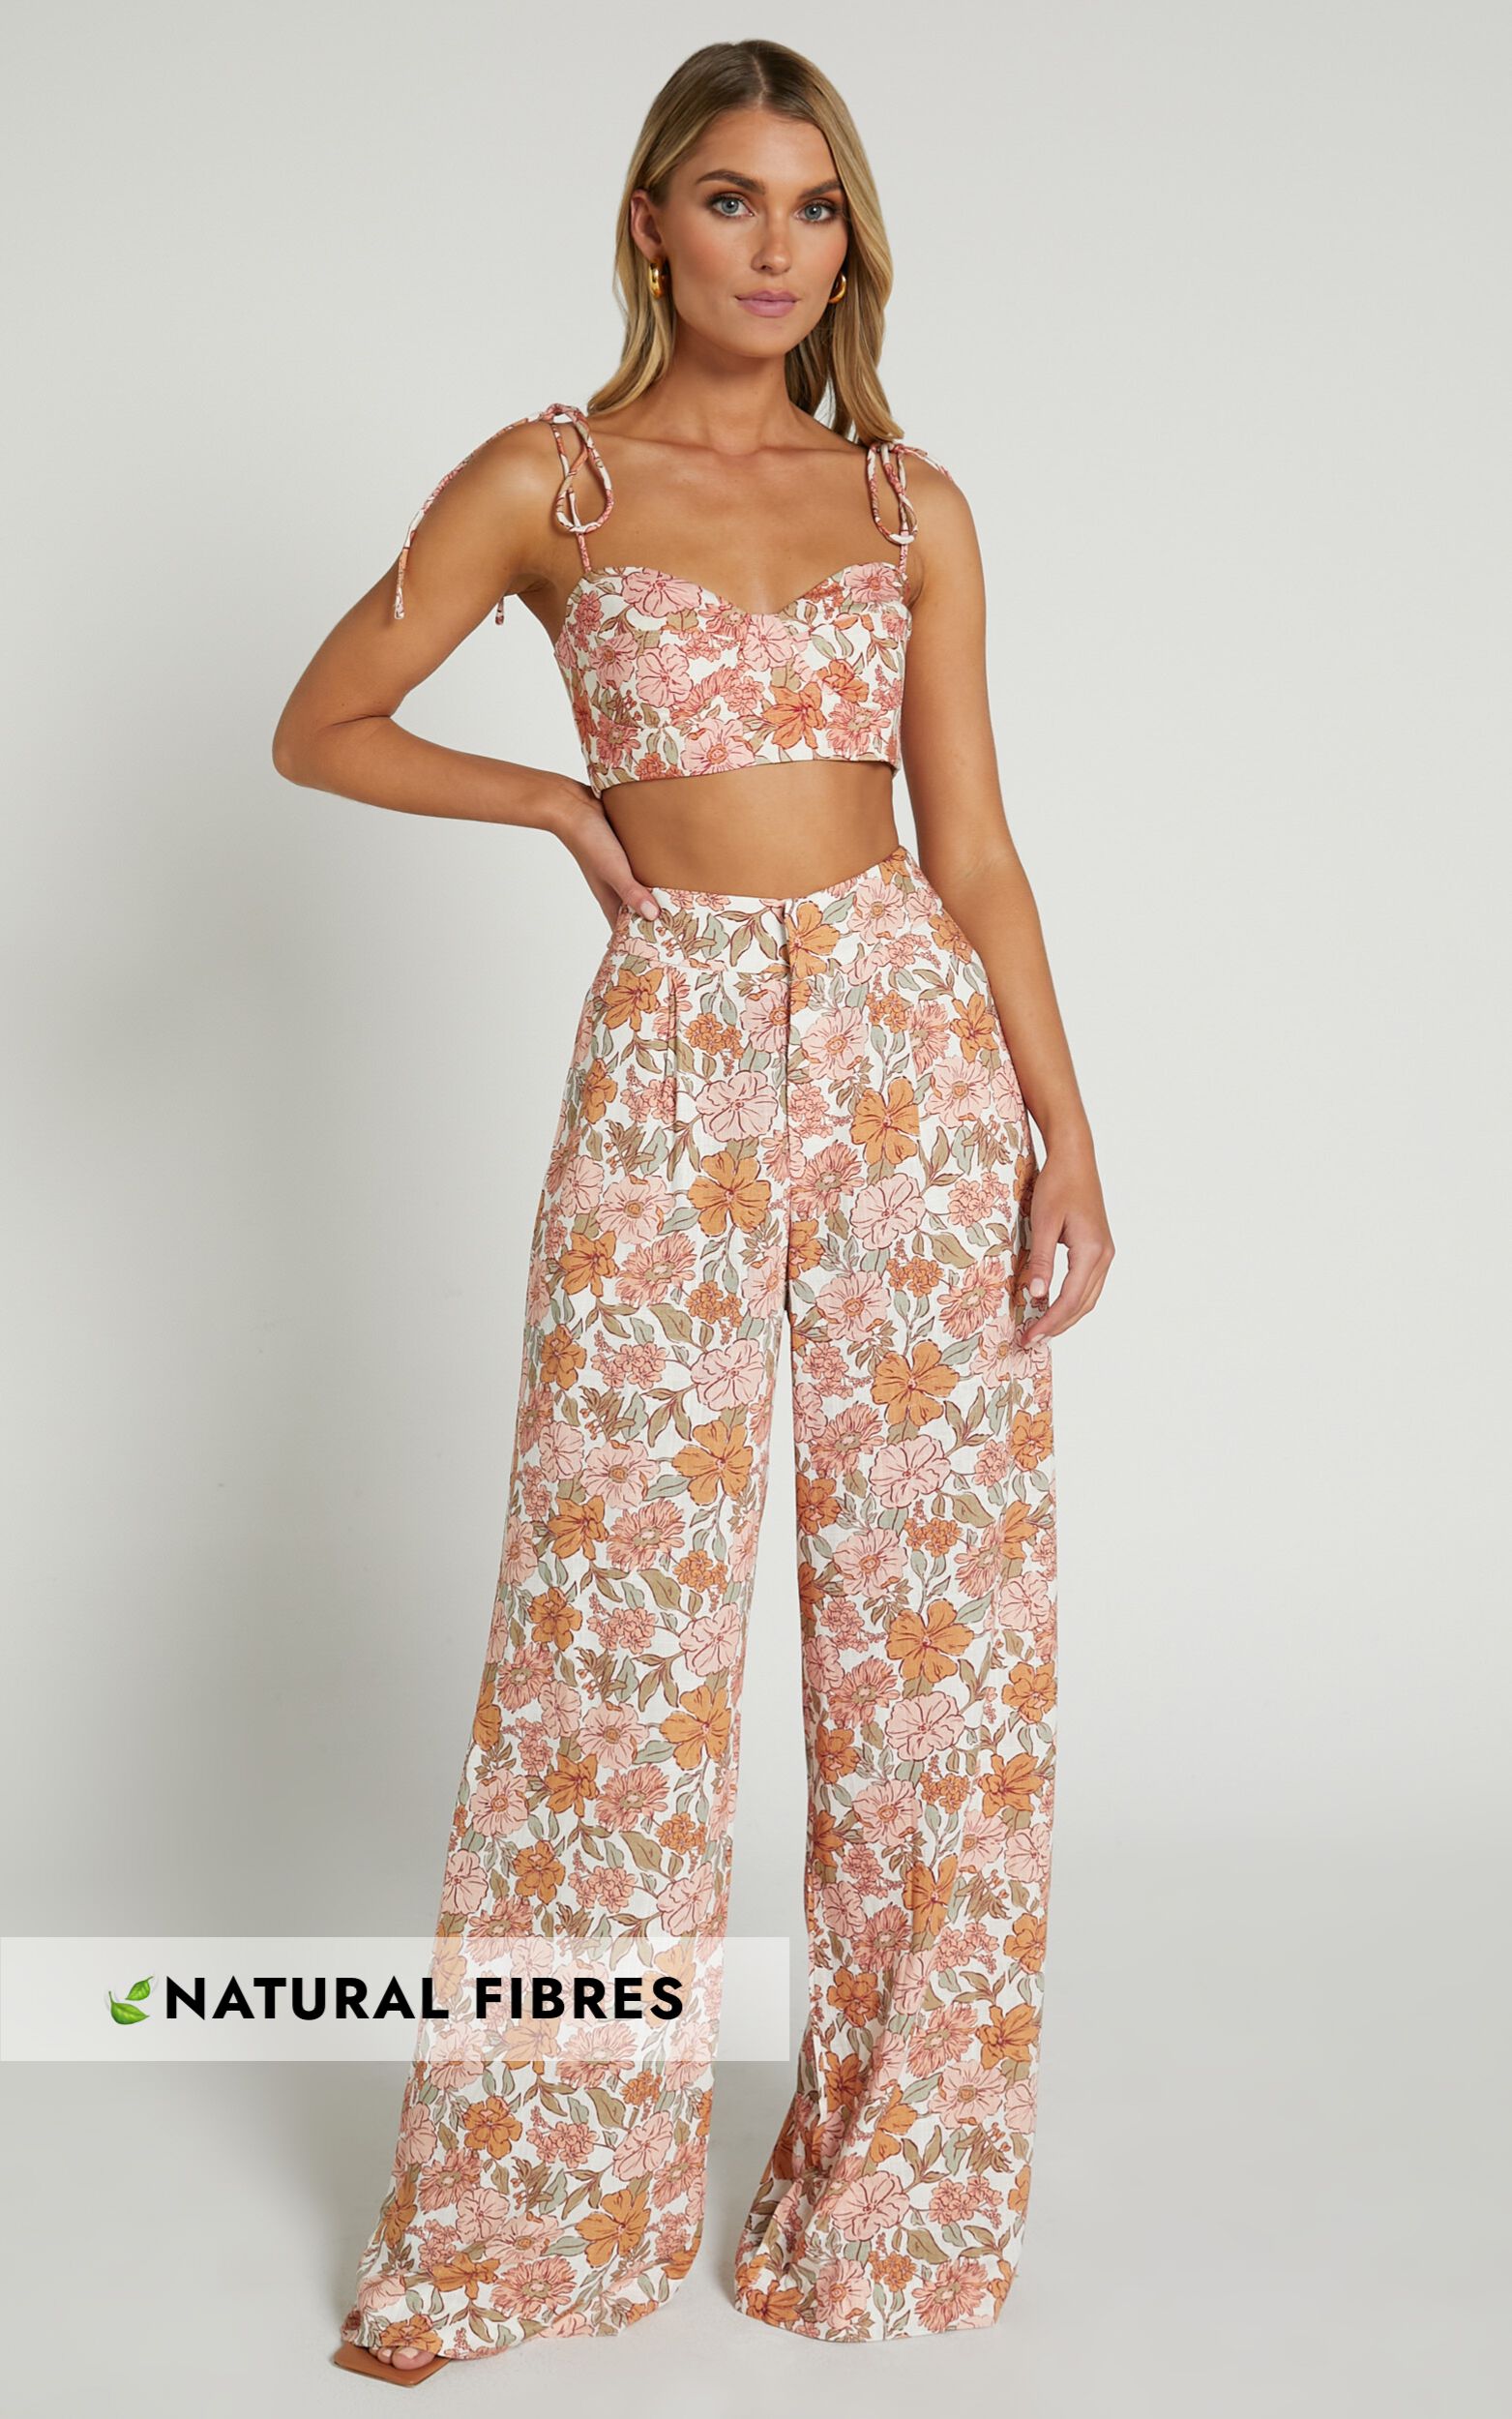 Amalie The Label Lorete Pants - High Rise Wide Leg in Wildflower Floral - 08, MLT1